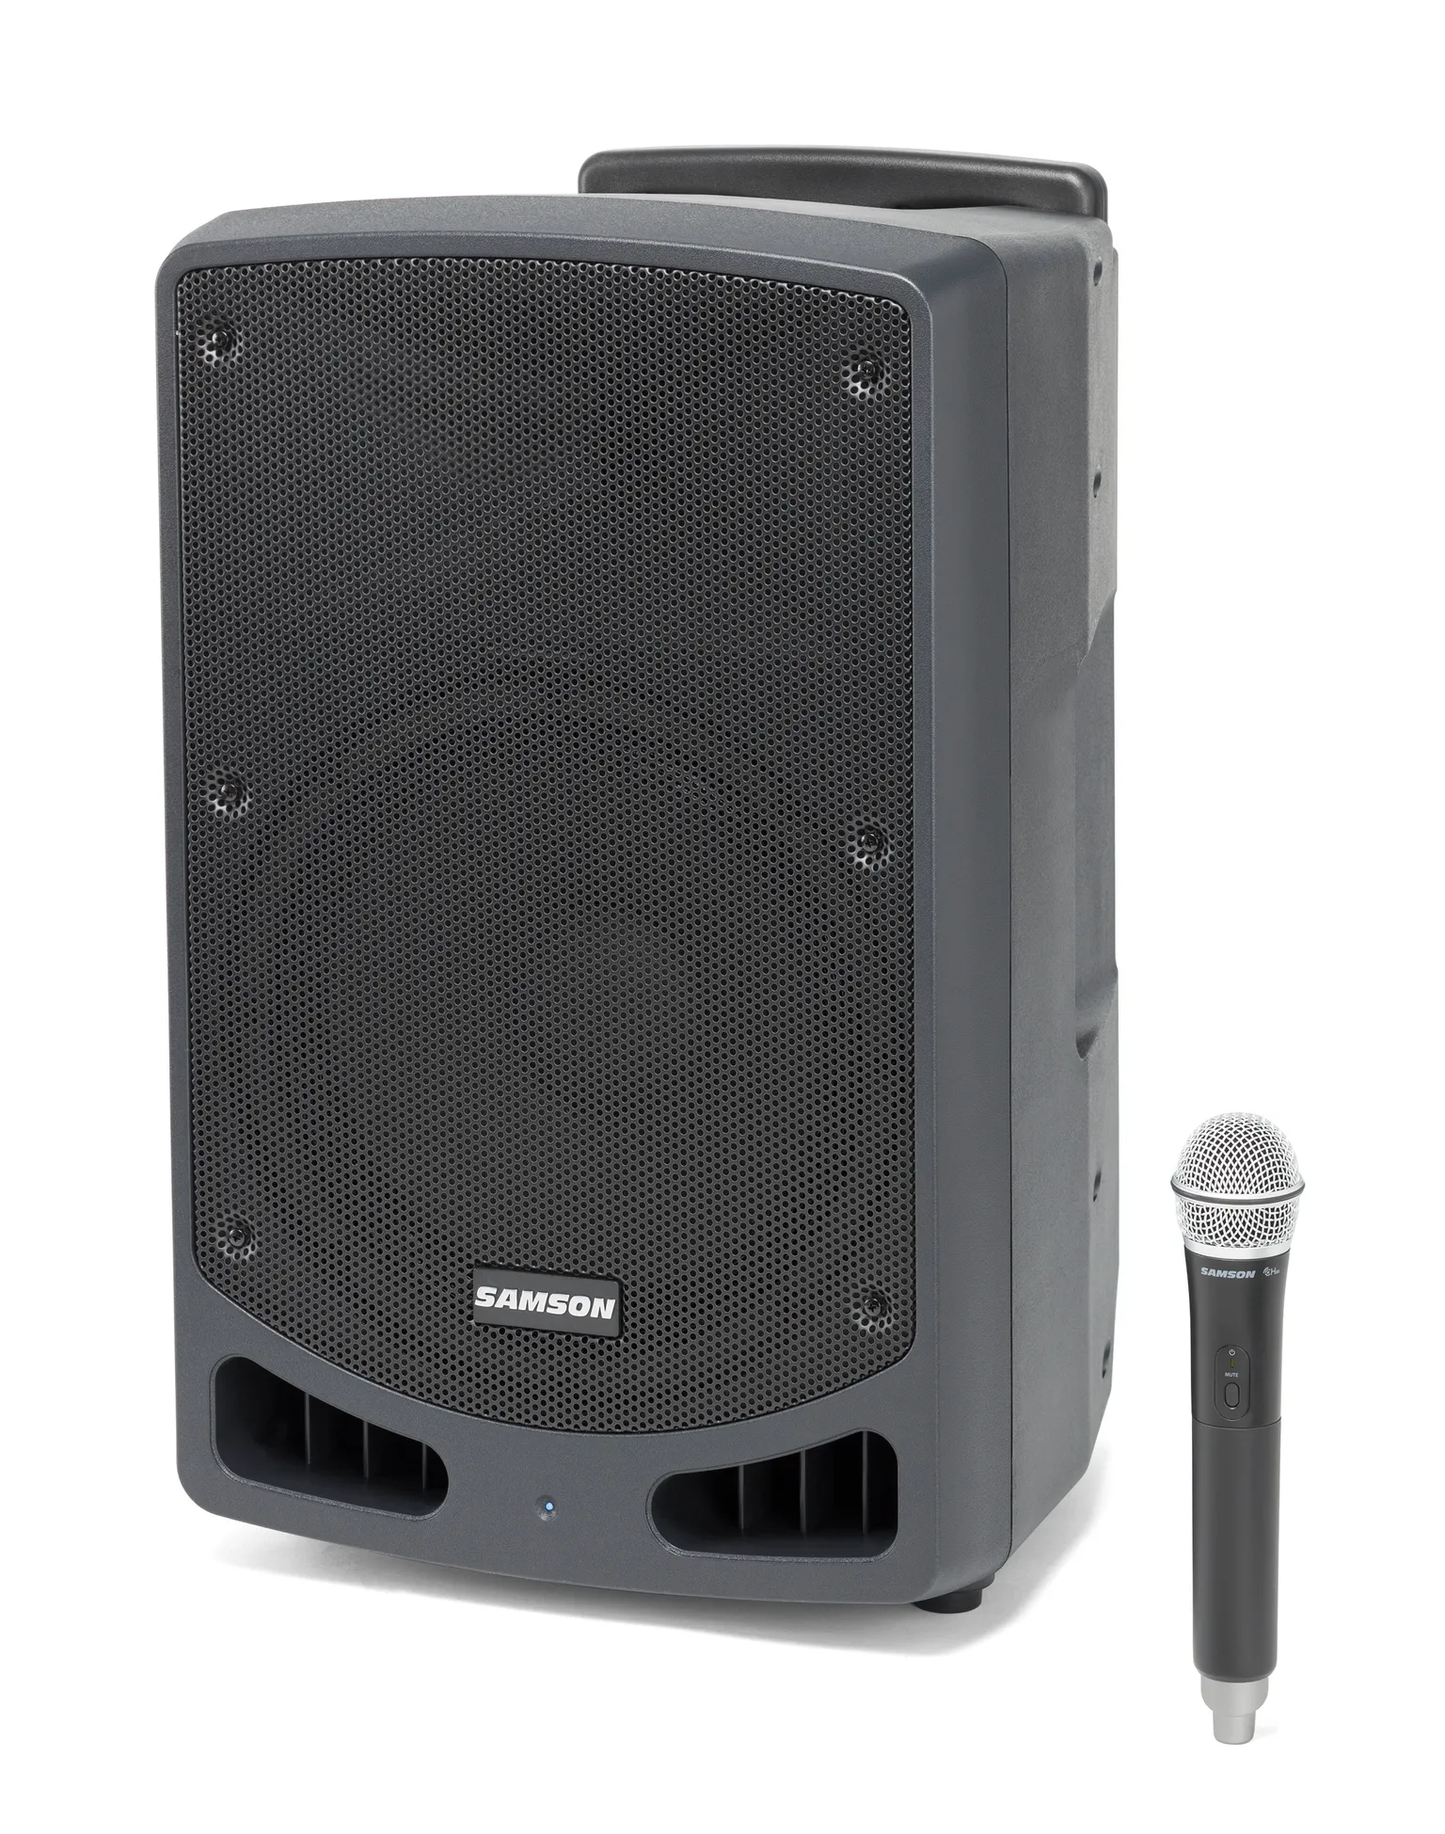 SAMSON Expedition XP312w Rechargeable Portable PA with Handheld Wireless System Band D - Poppa's Music 